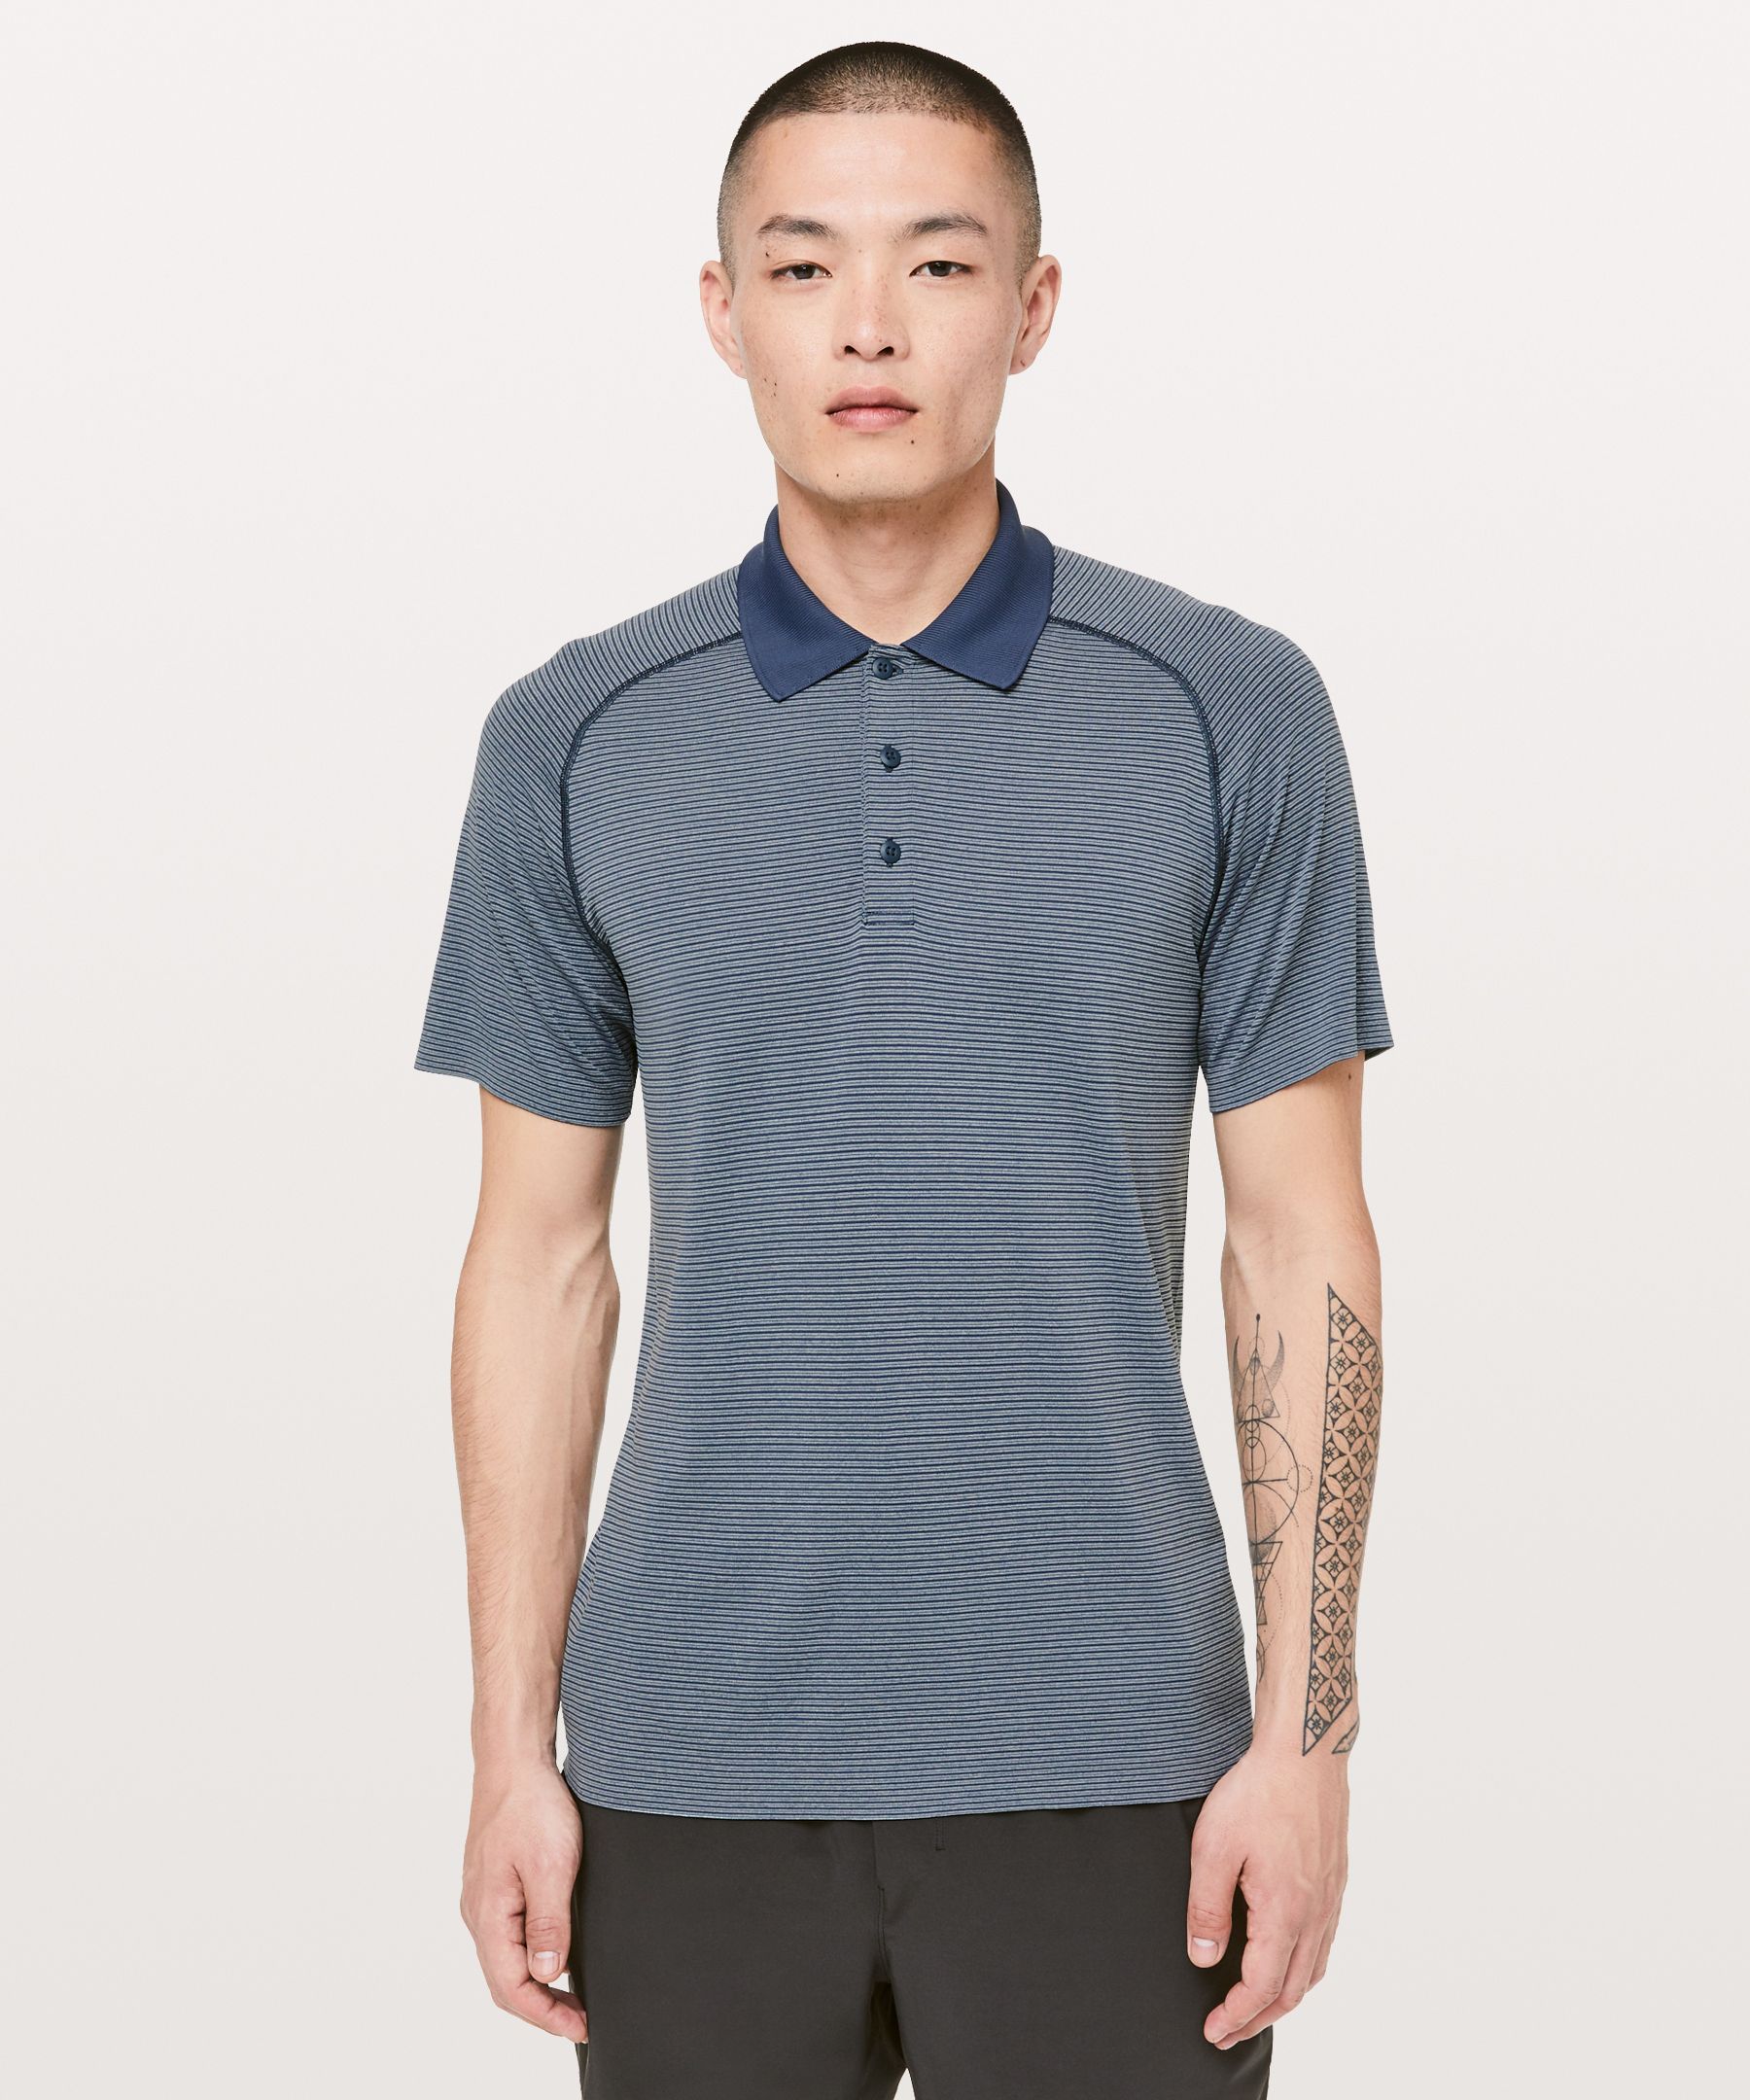 Lululemon Metal Vent Tech Polo In Mach Blue/white